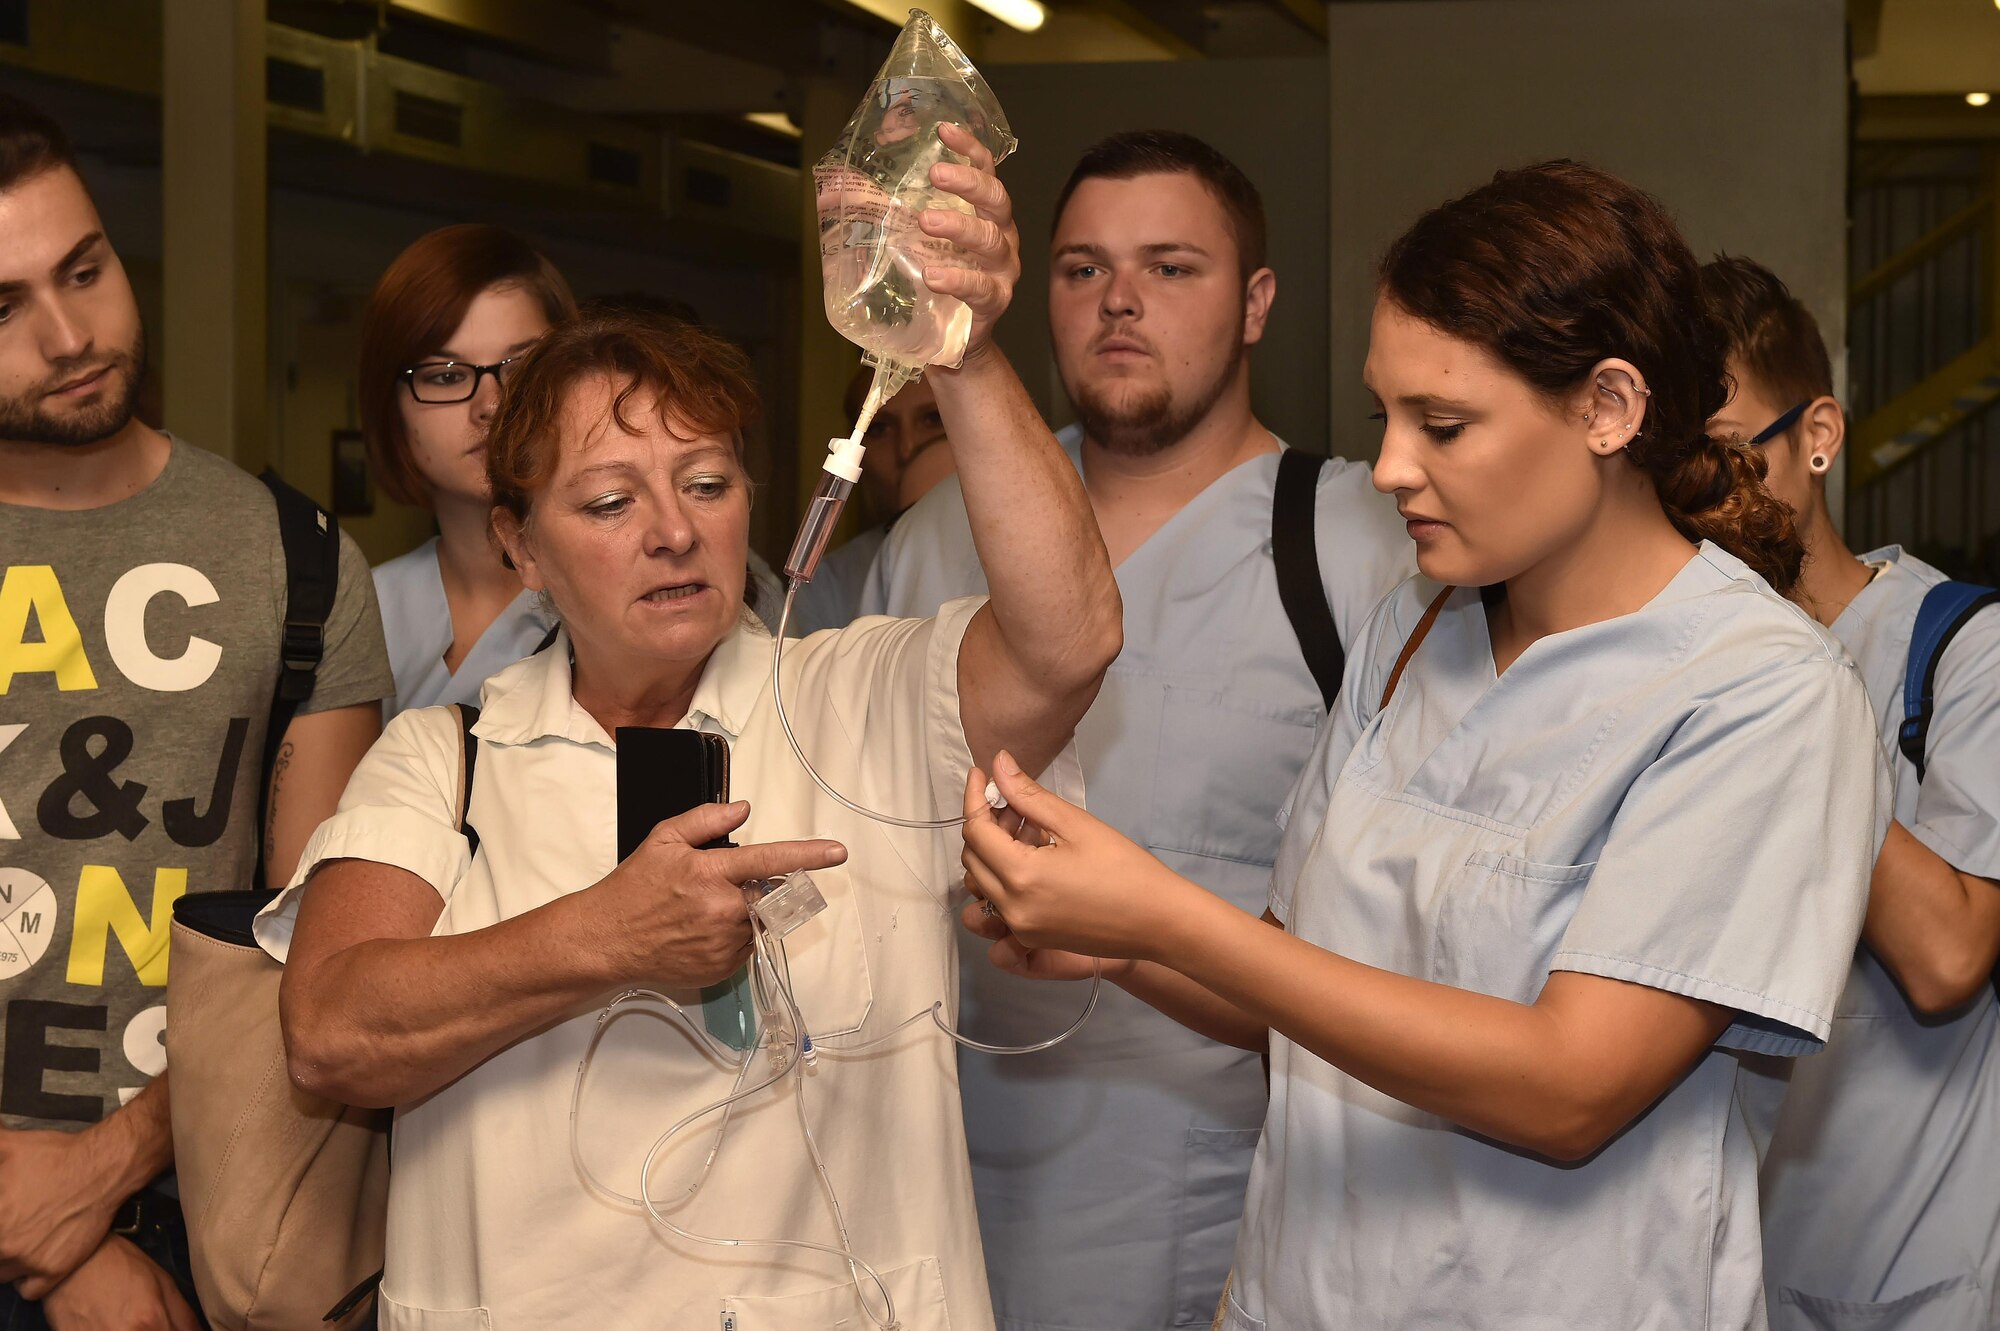 A nursing instructor from Caritas SchulZentrum St. Hildegard, Saarbrücken, Germany, shows her students how American IV’s are set up differently than German IV’s at Ramstein Air Base, Germany, Sept. 13, 2016. Nineteen nursing students toured the 86th Aeromedical Evacuation Squadron’s facilities, learning how Airmen accomplish their mission. (U.S. Air Force photo by Senior Airman Jonathan Bass)